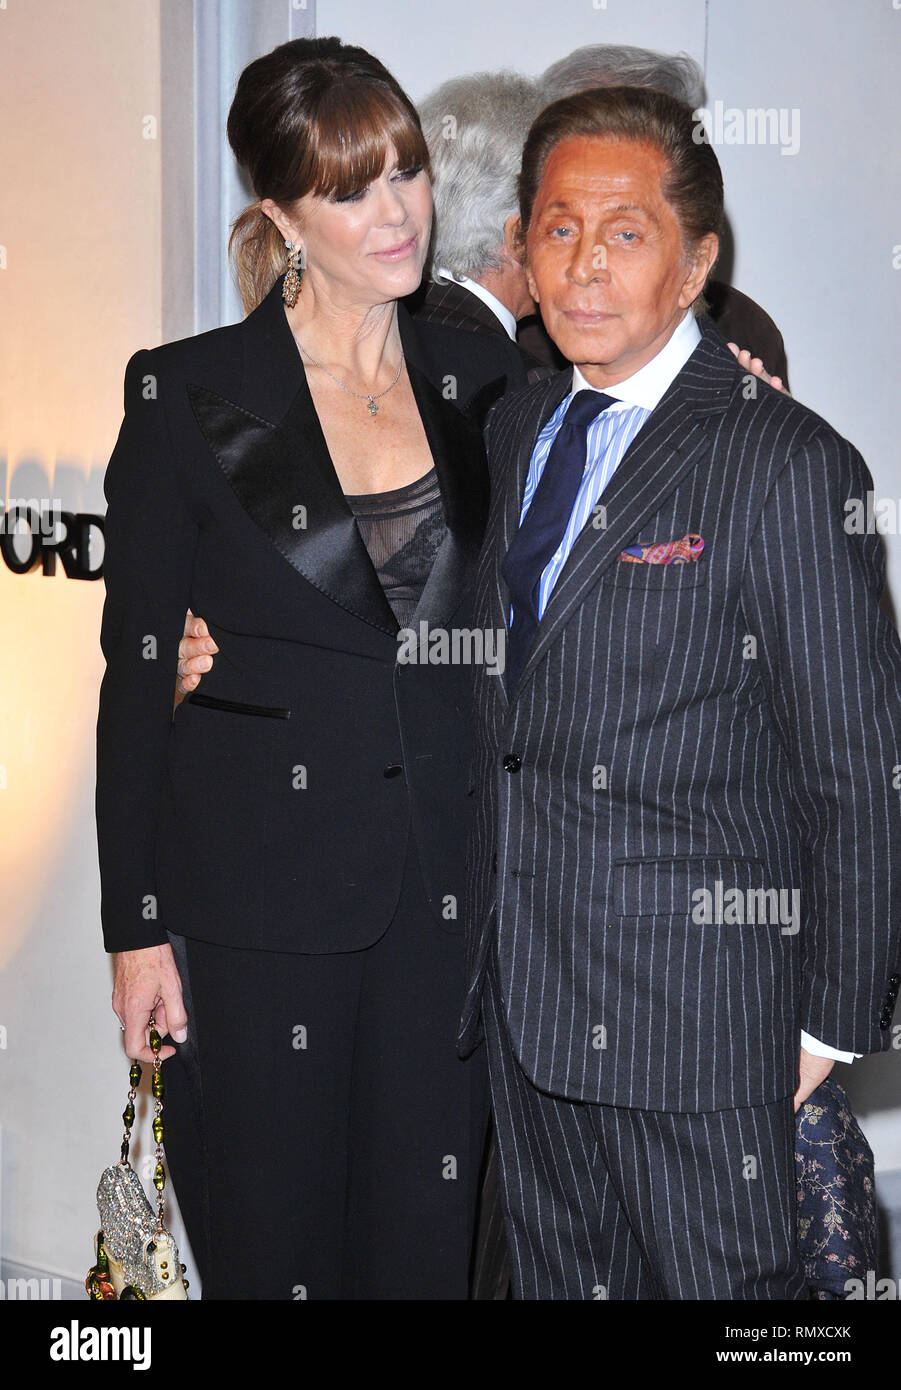 ligegyldighed Humanistisk ejer Rita Wilson, Valentino at the Opening of Tom Ford Store in Beverly Hills. Rita Wilson, Valentino 49 Event in Hollywood Life - California, Red Carpet  Event, USA, Film Industry, Celebrities, Photography, Bestof, Arts